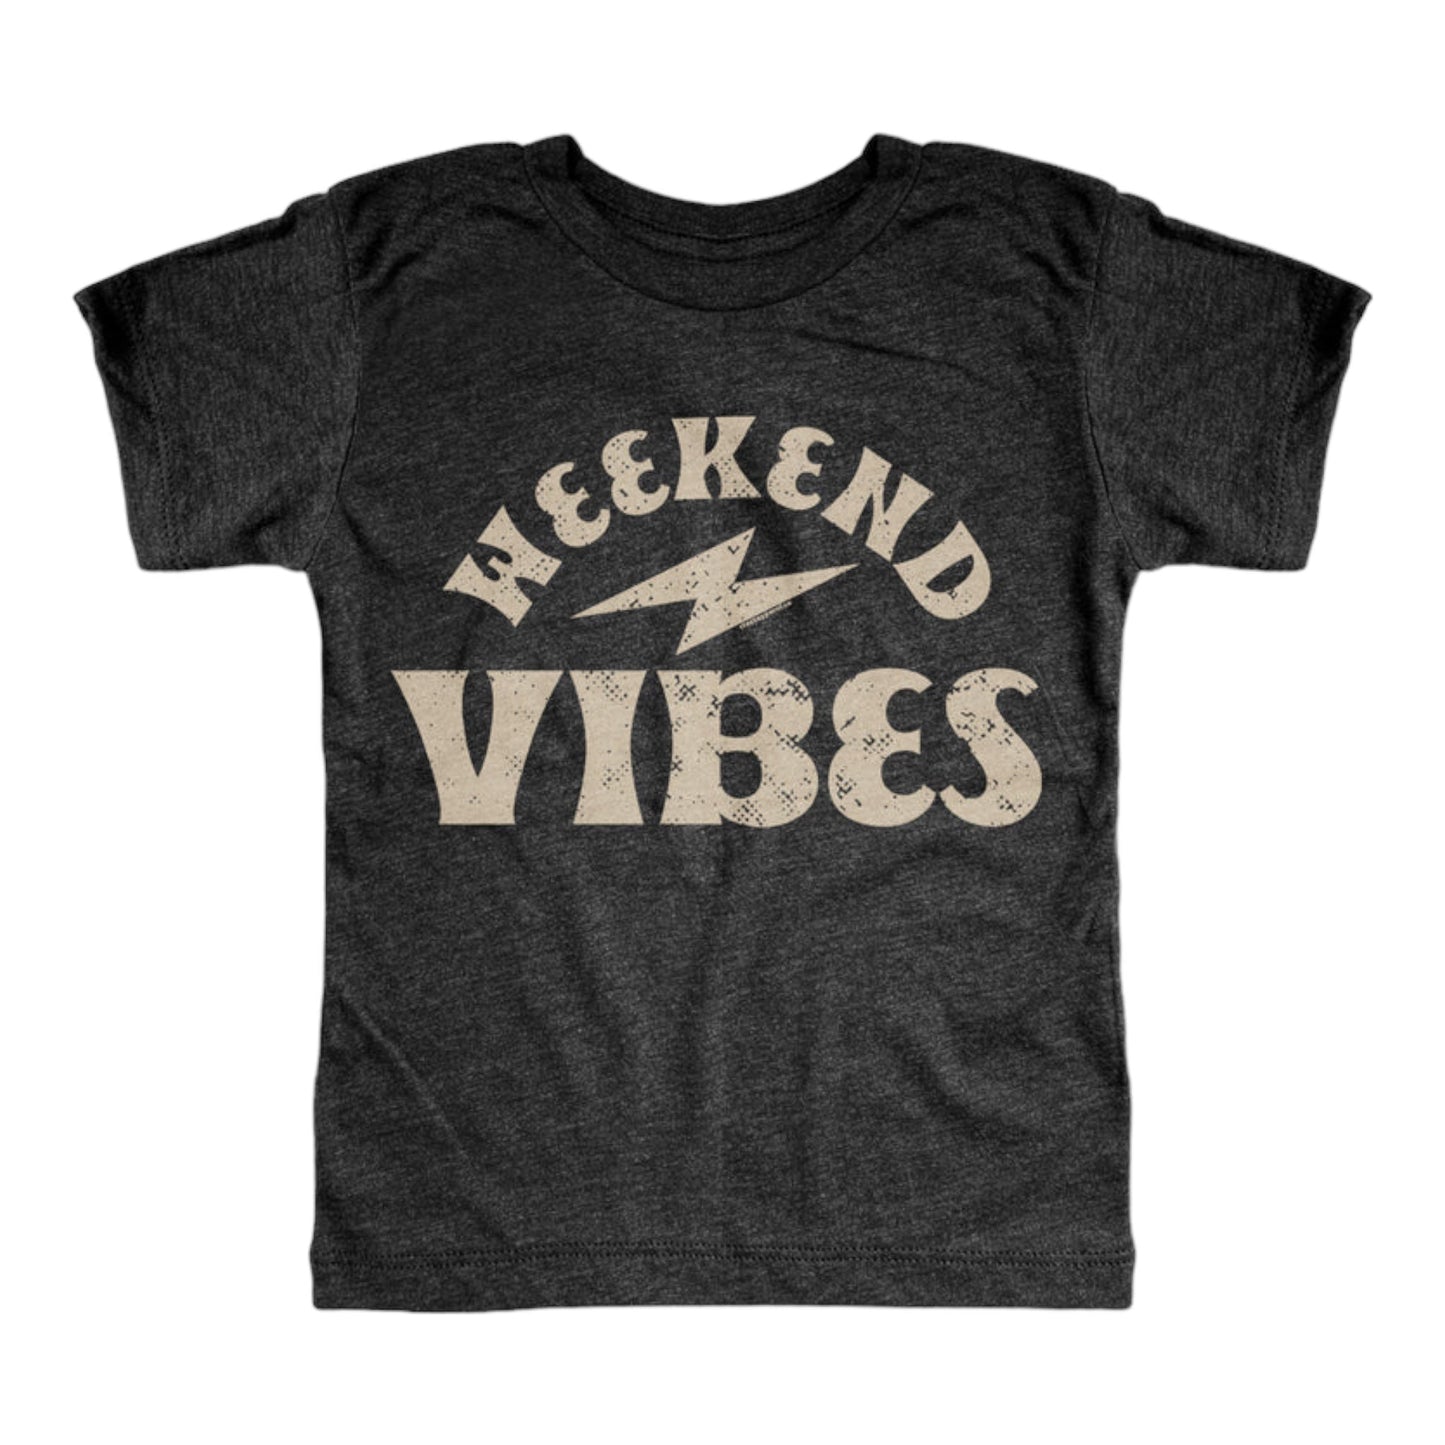 Weekend Vibes Tee - Something about Sofia